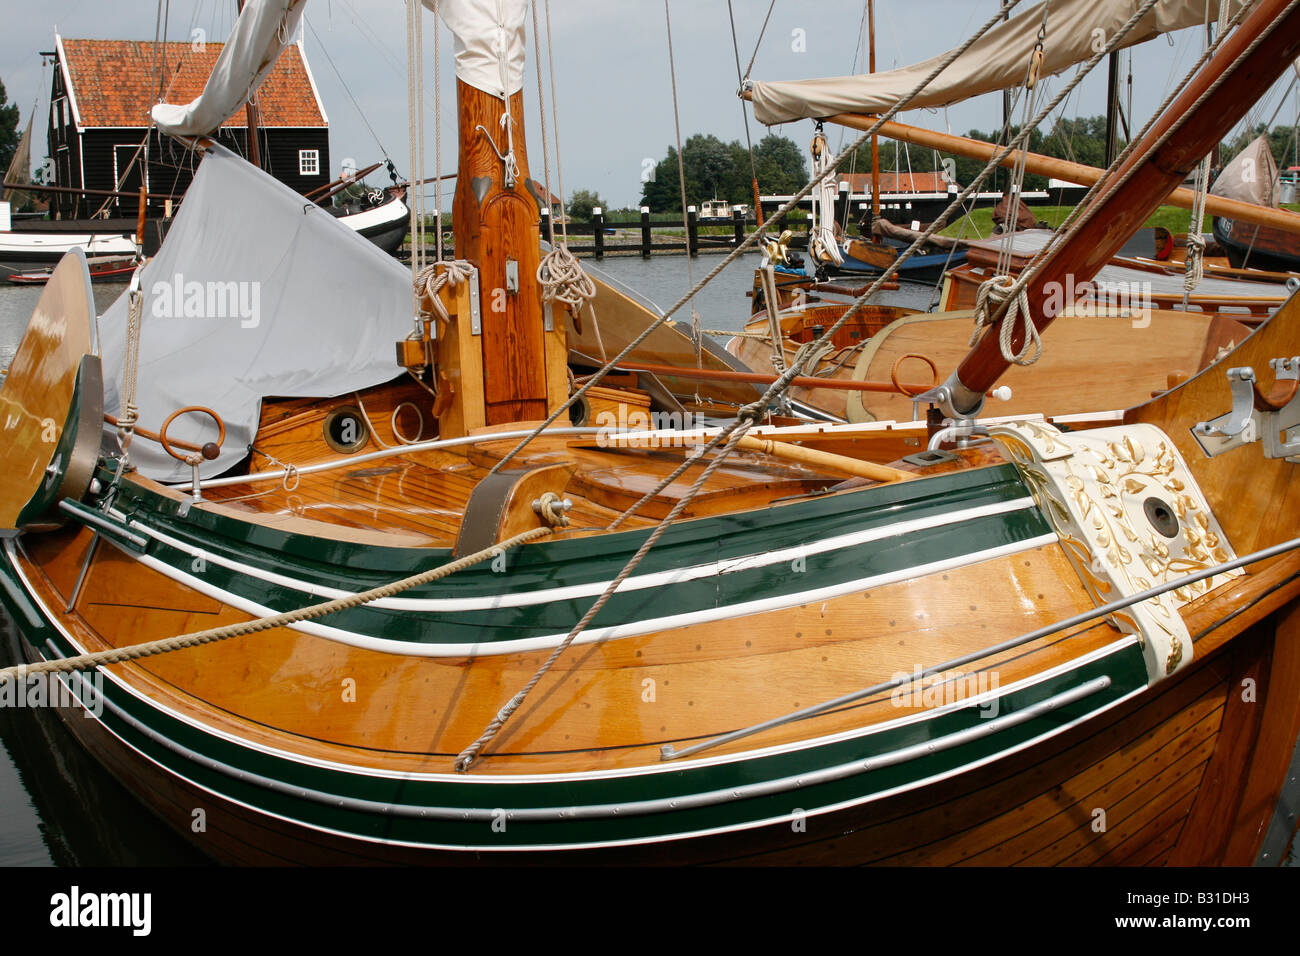 Beautiful old wooden sailing boat Stock Photo